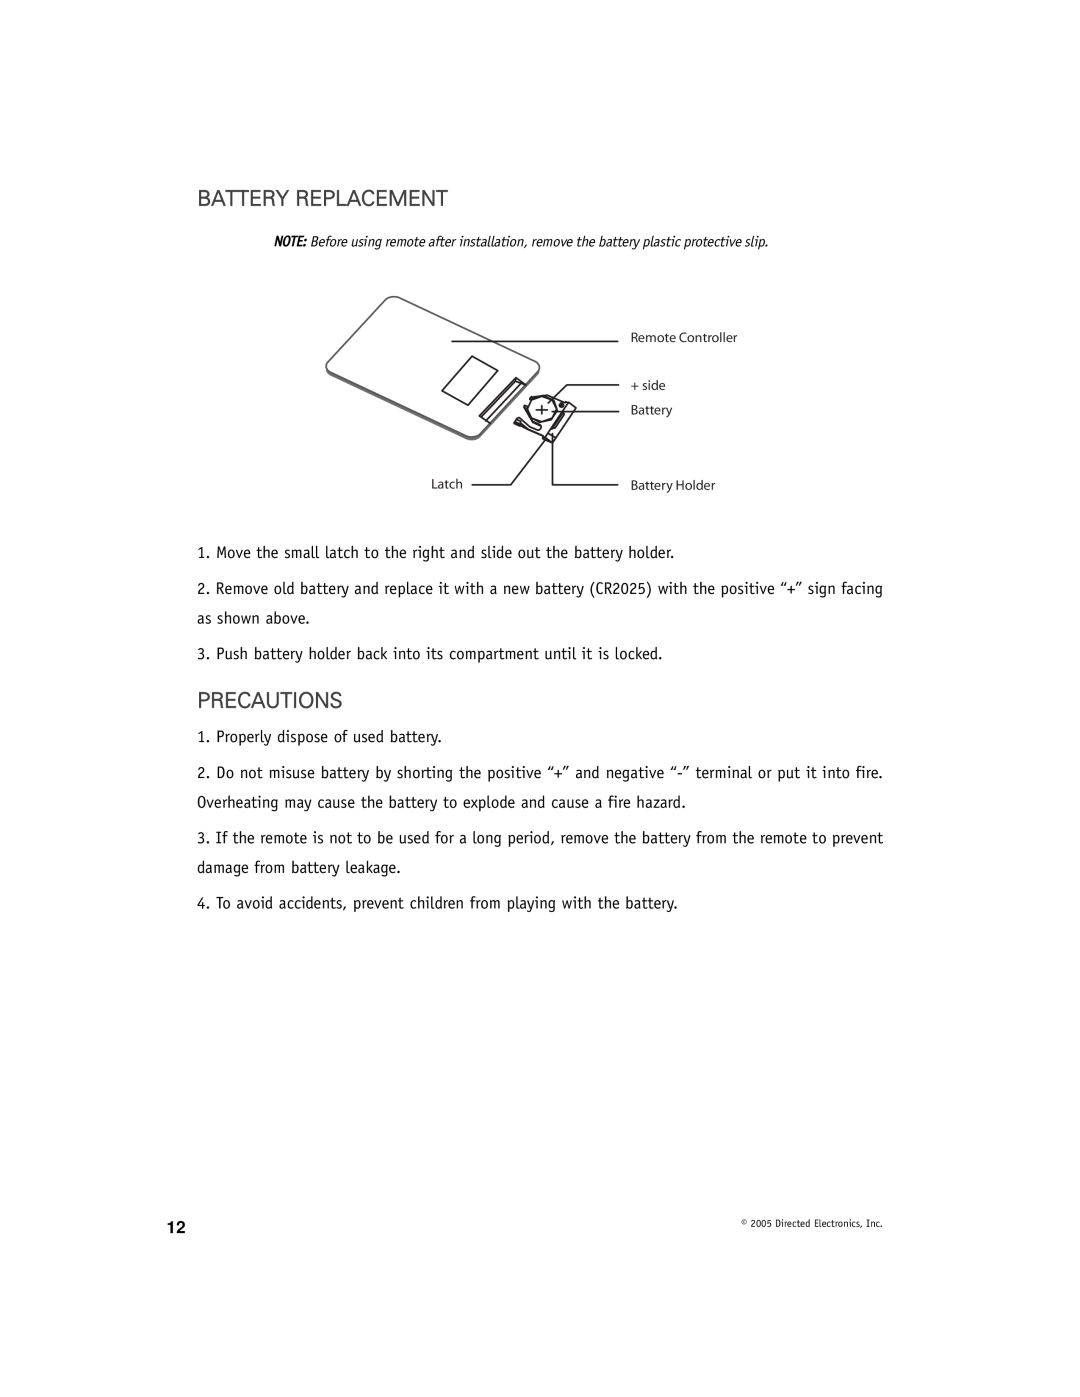 Directed Video OHW17 manual Battery Replacement, Precautions 